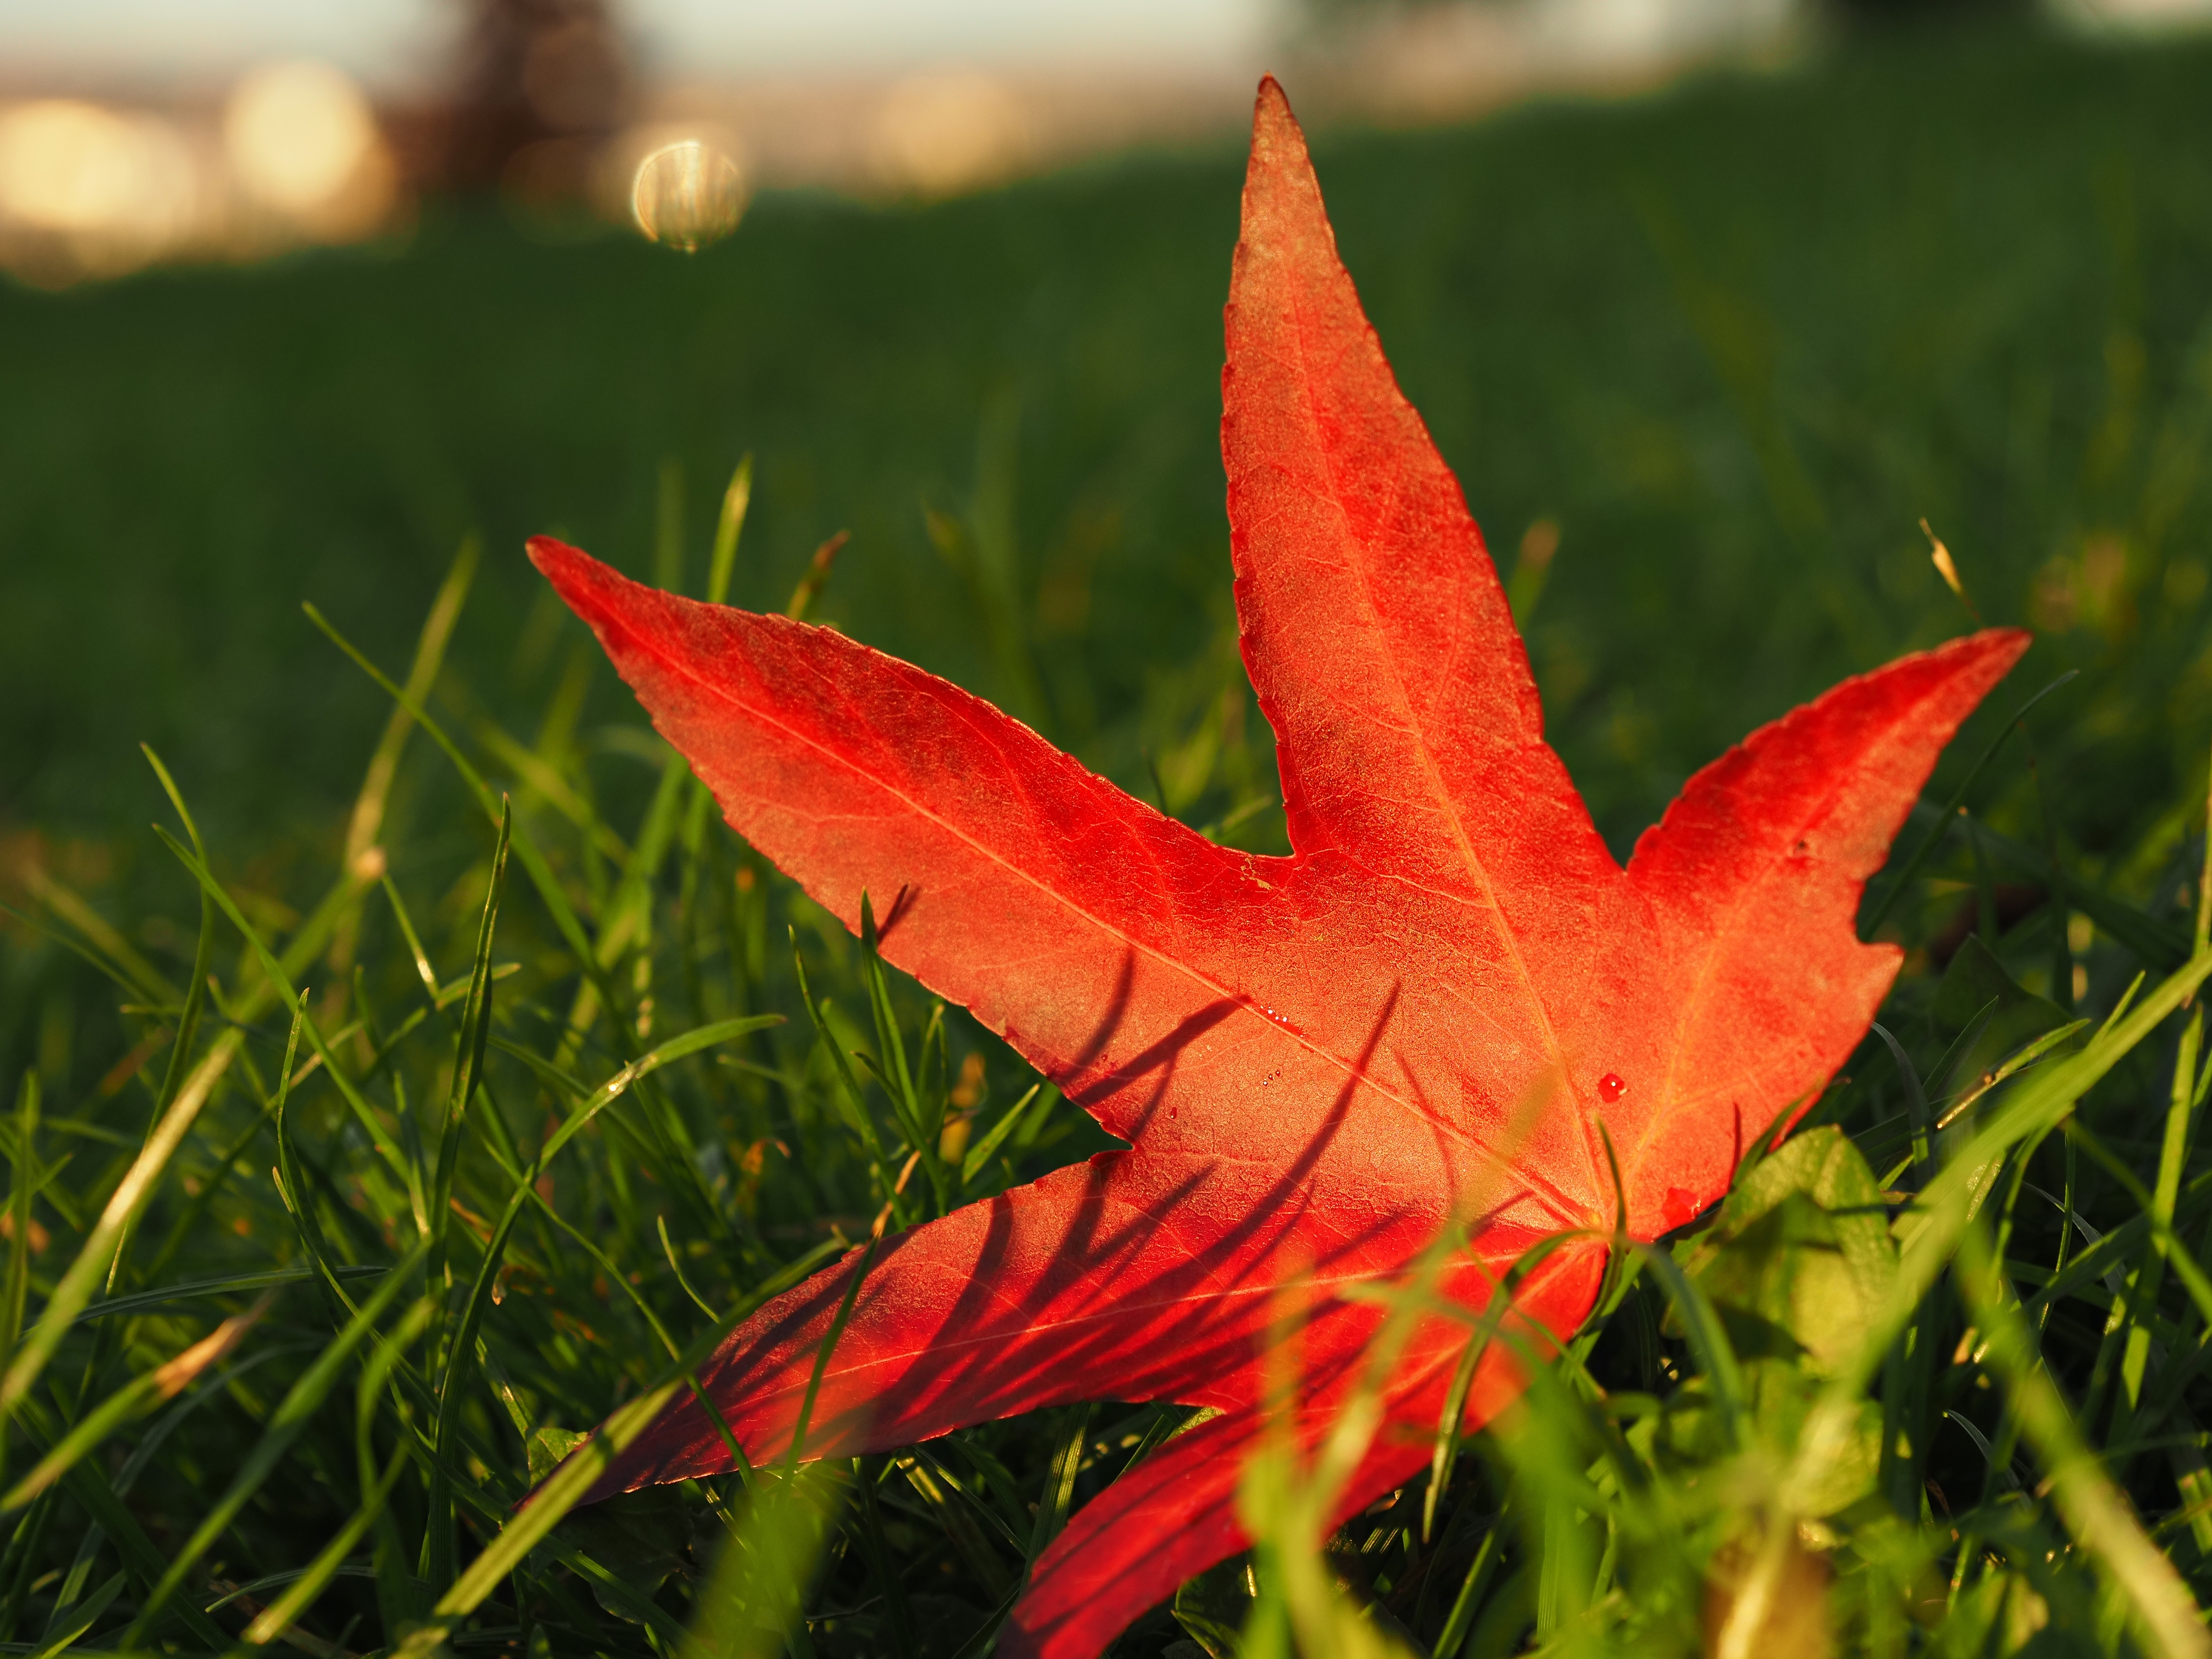 Red leaf in the sun, with bokeh, 1/160s, f/5.6, ISO200, 45mm, Photo: Joshua Waller